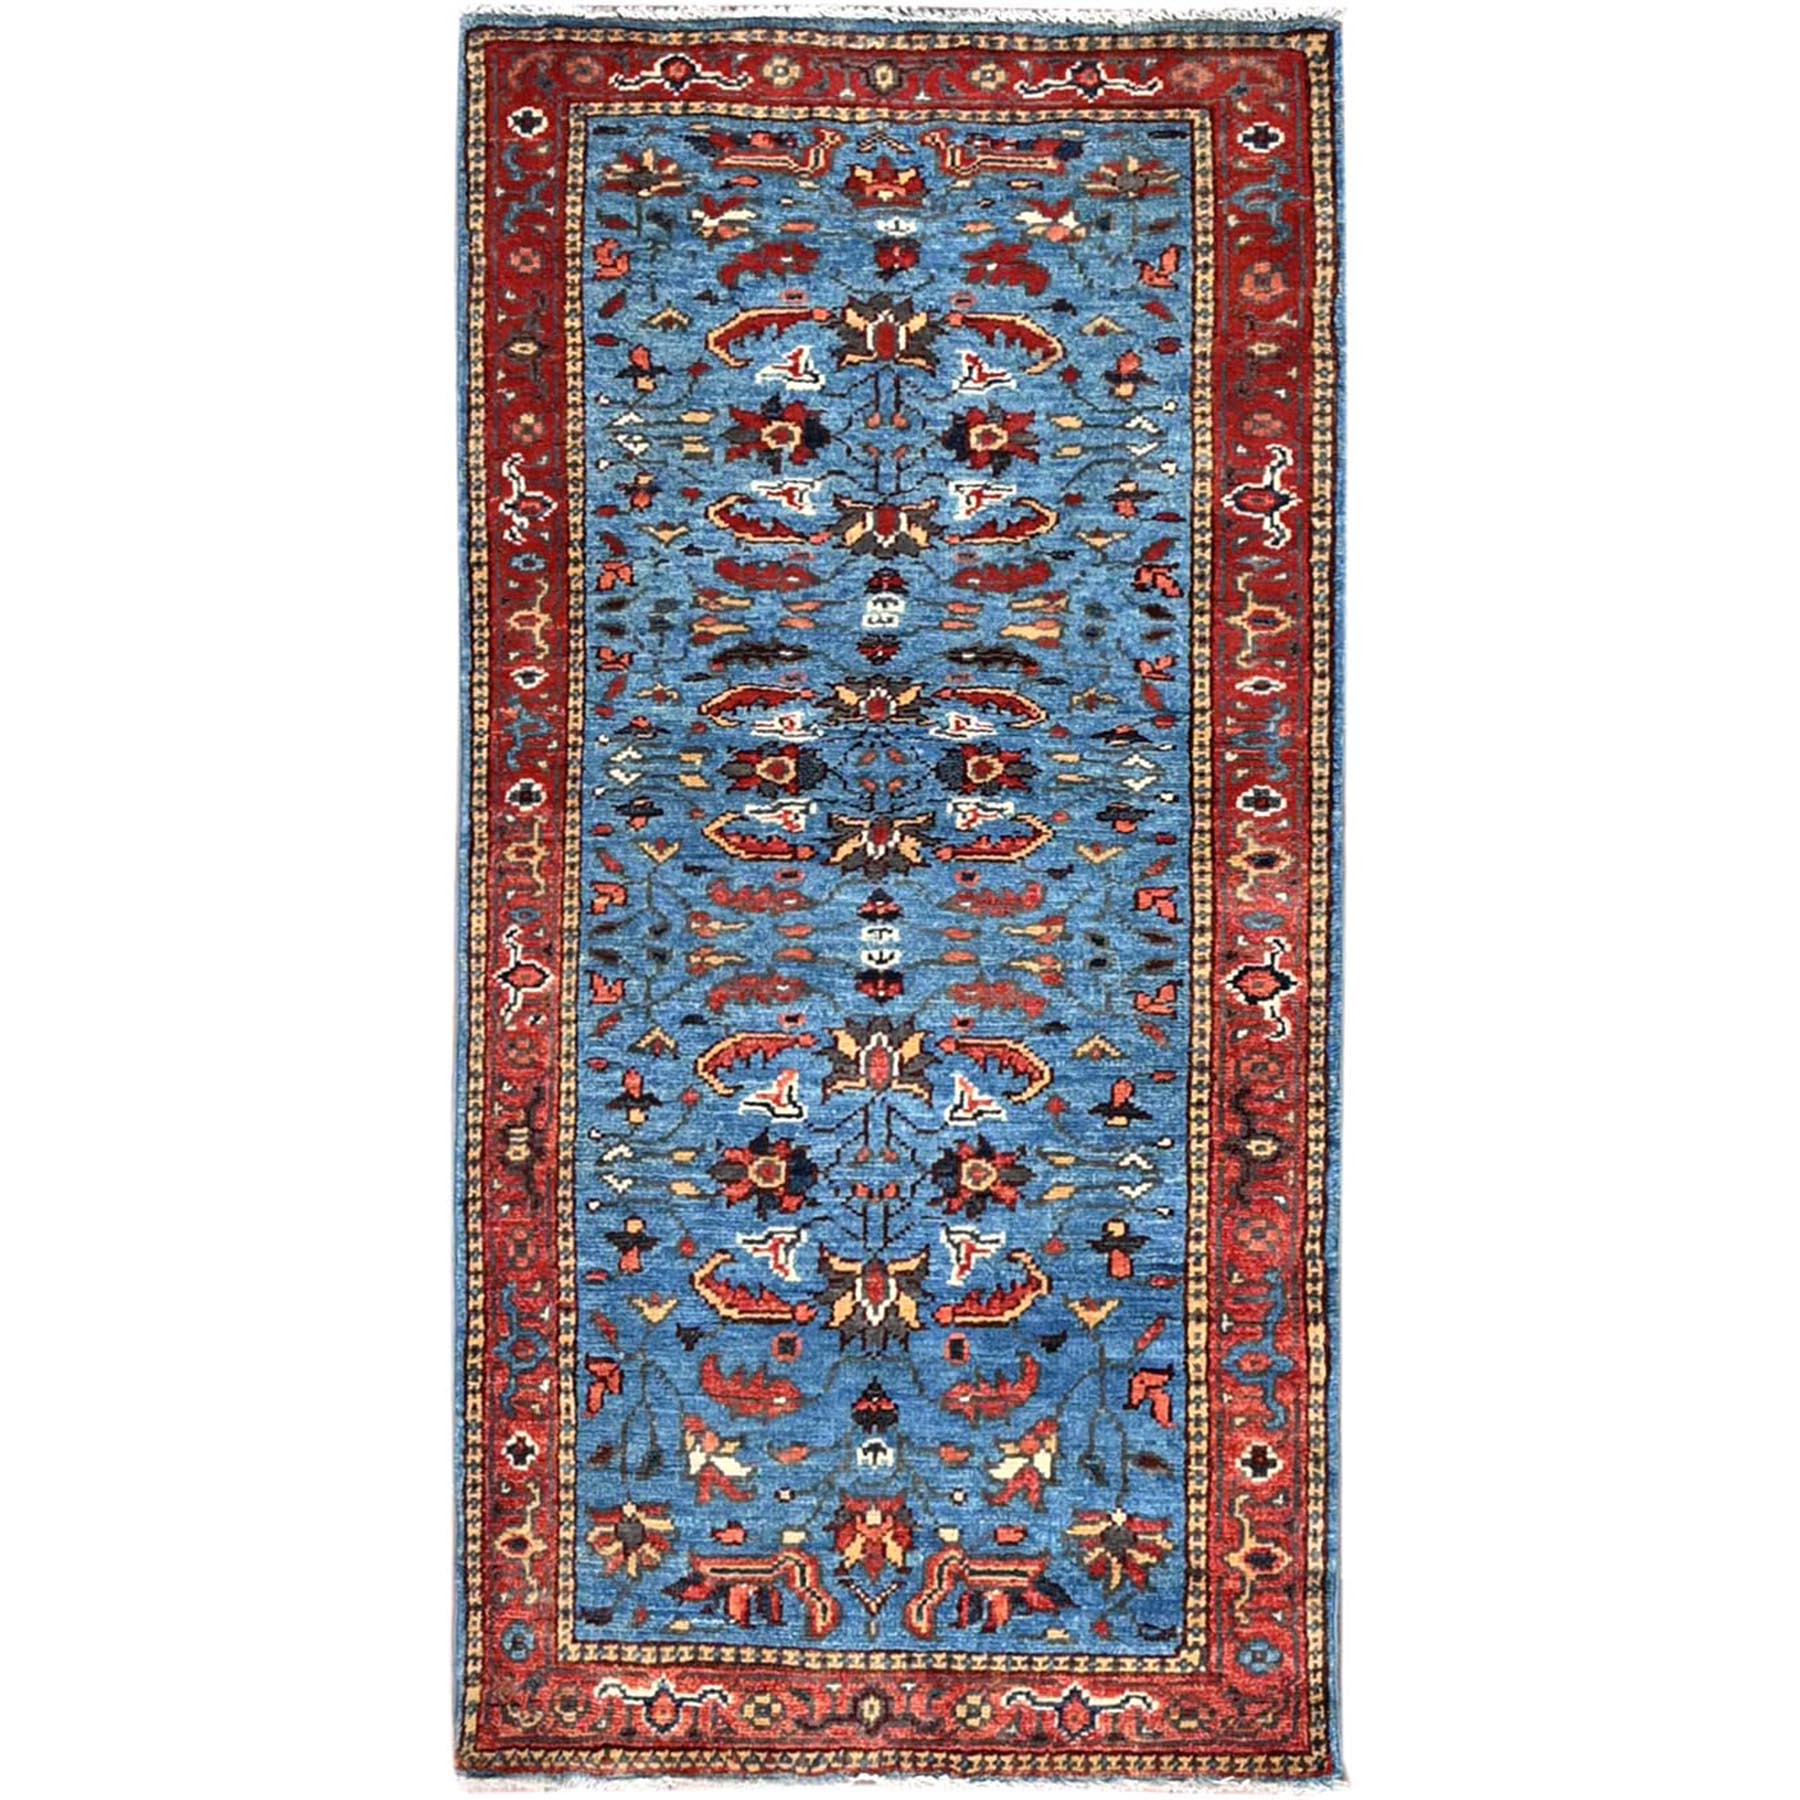  Wool Hand-Knotted Area Rug 2'3